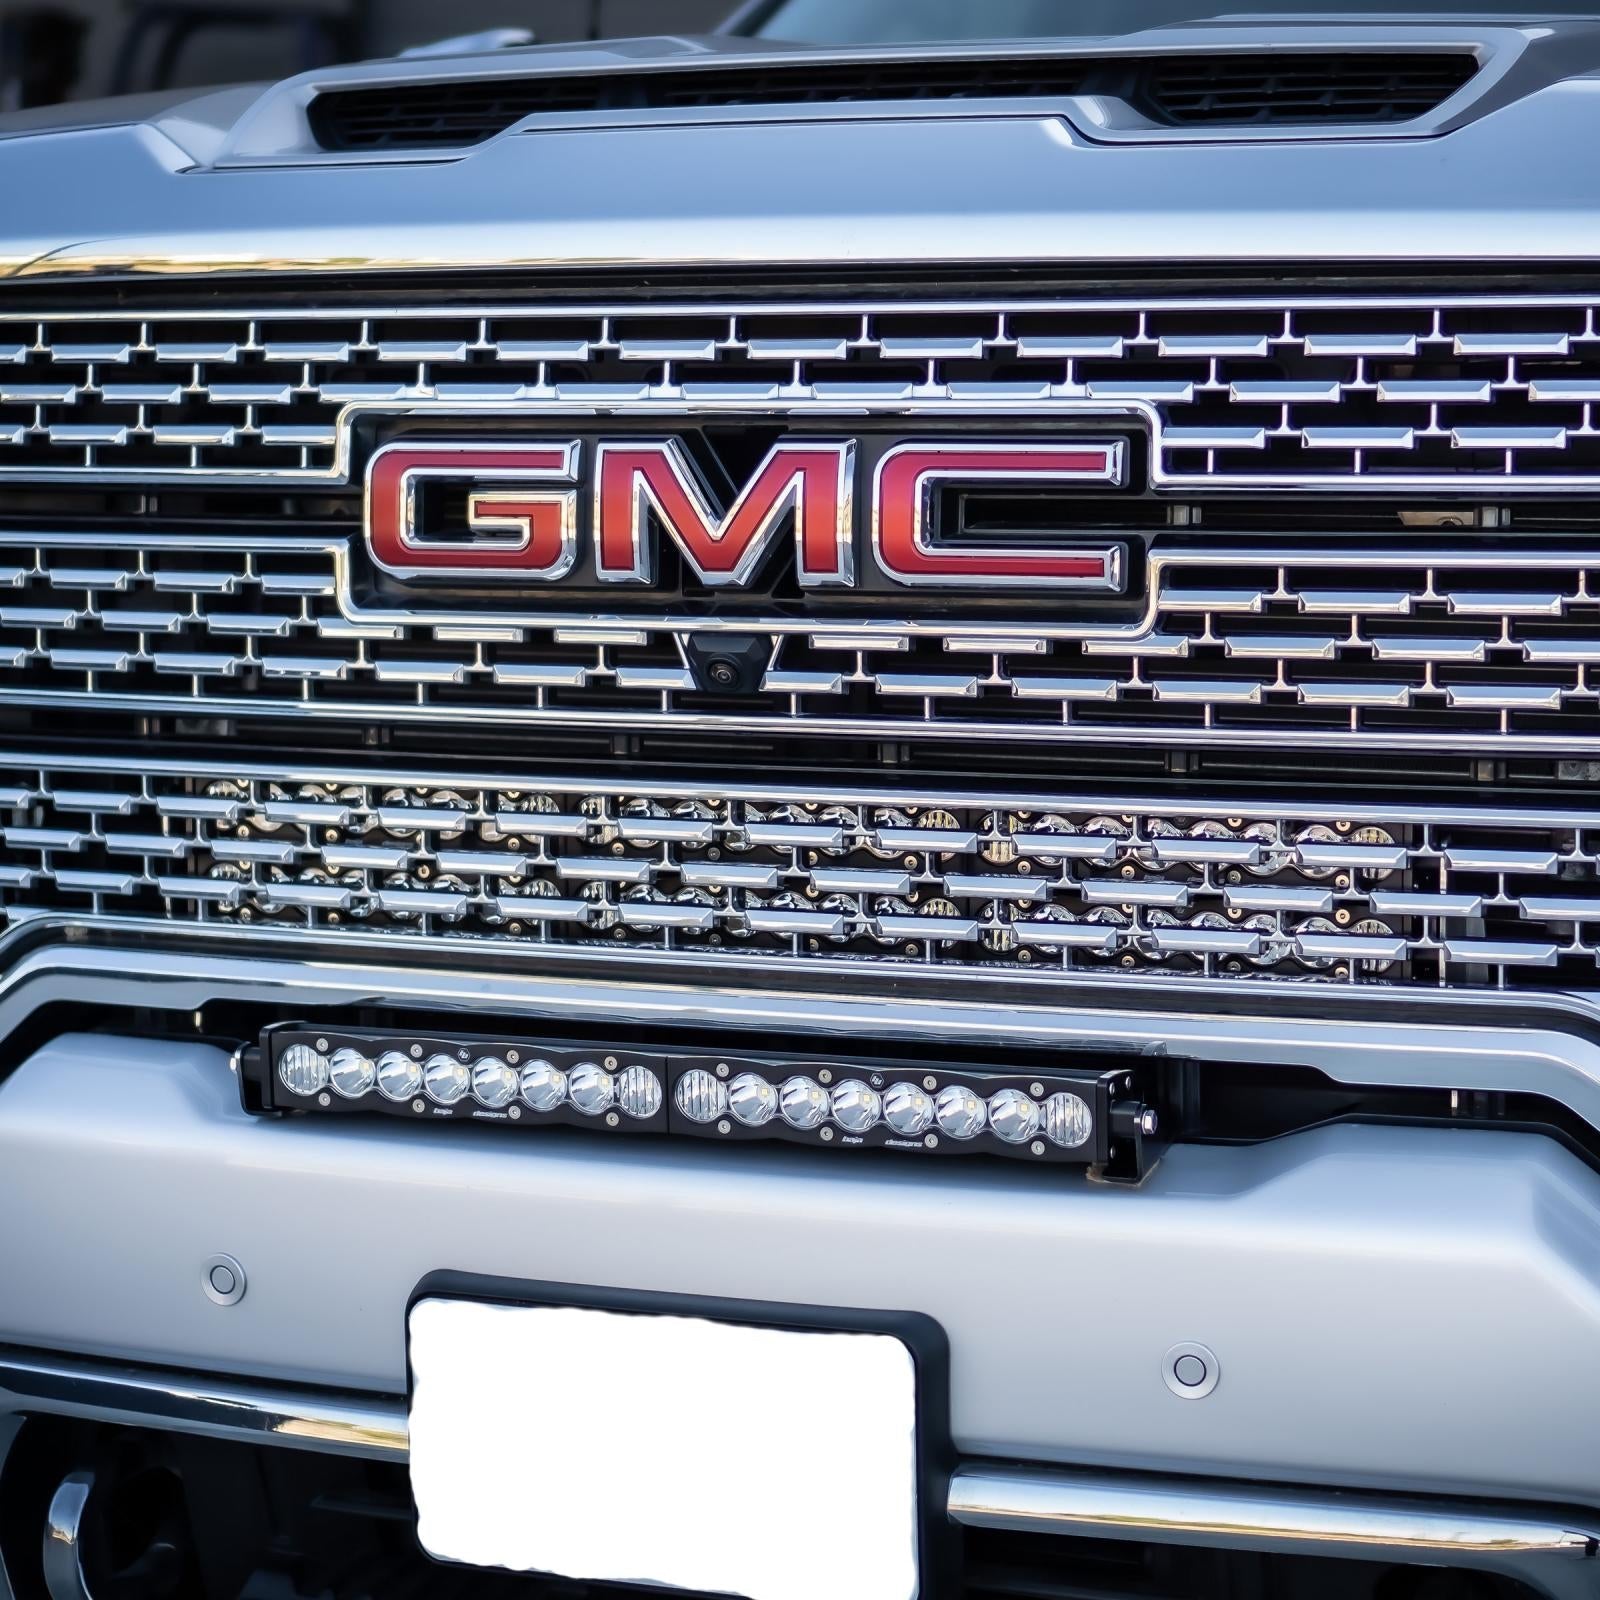 '20-22 Chevy/GMC 2500/3500 Baja Designs Dual 30" S8 Behind the Grille LED Light Bar Kit display